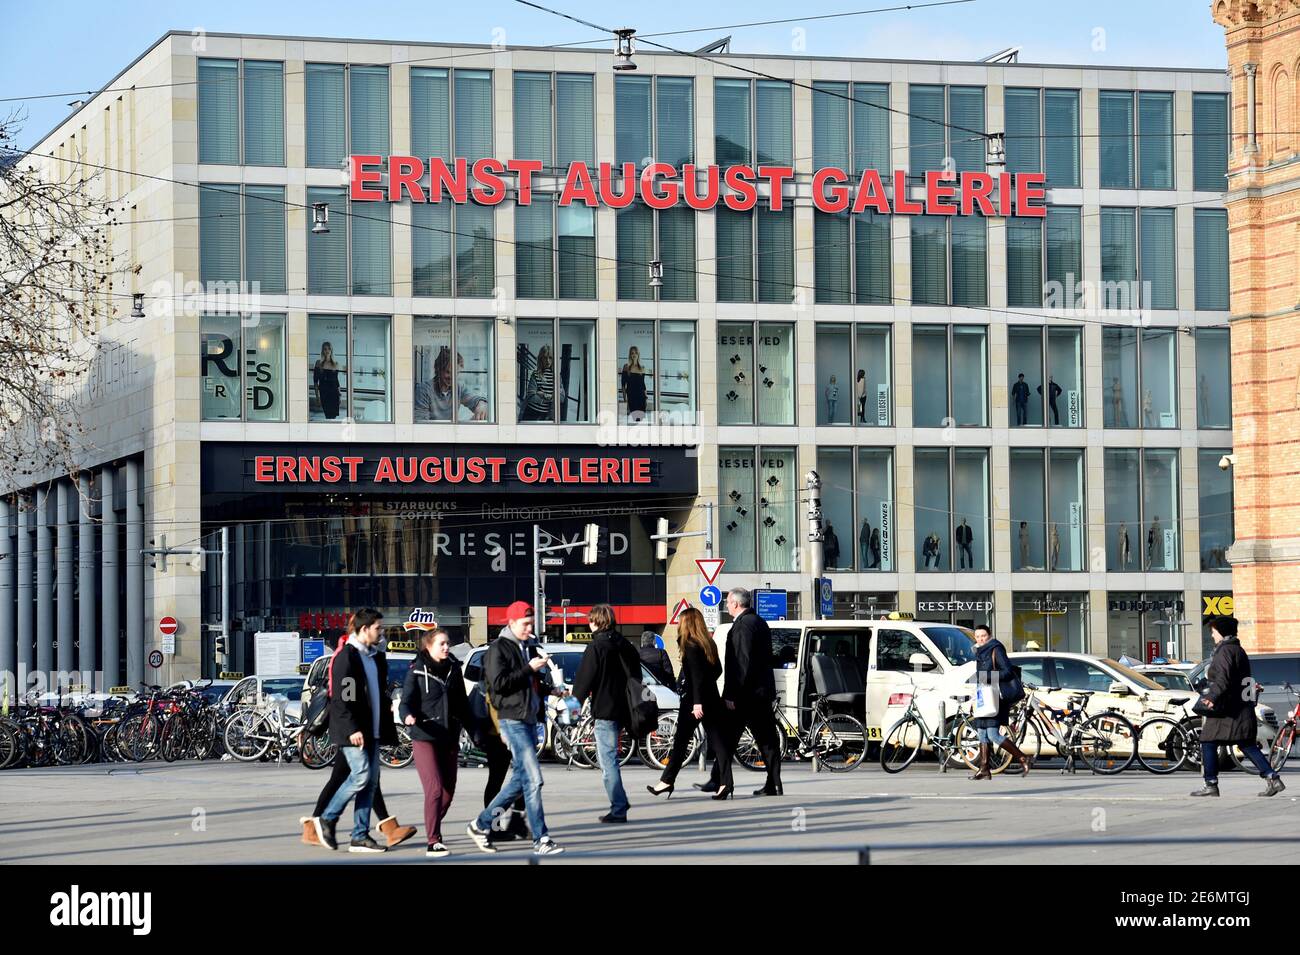 Ernst August Galerie High Resolution Stock Photography and Images - Alamy